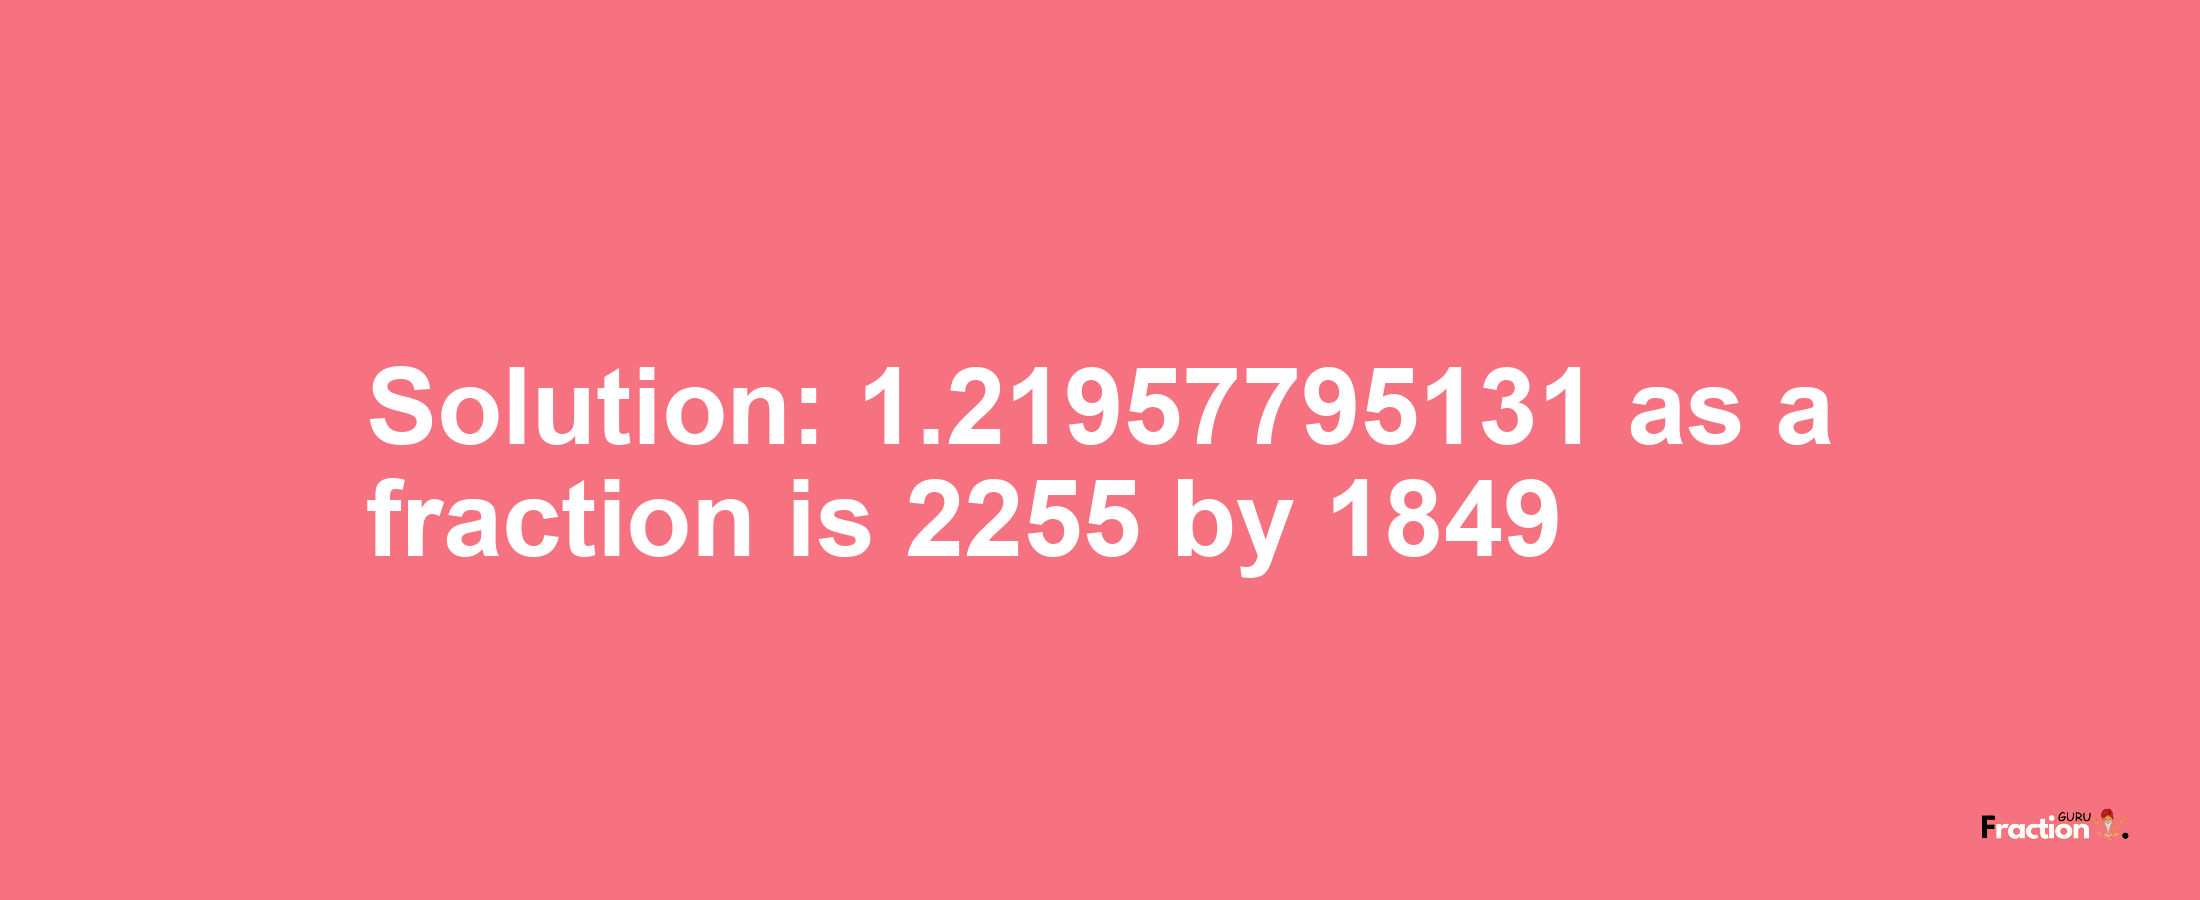 Solution:1.21957795131 as a fraction is 2255/1849